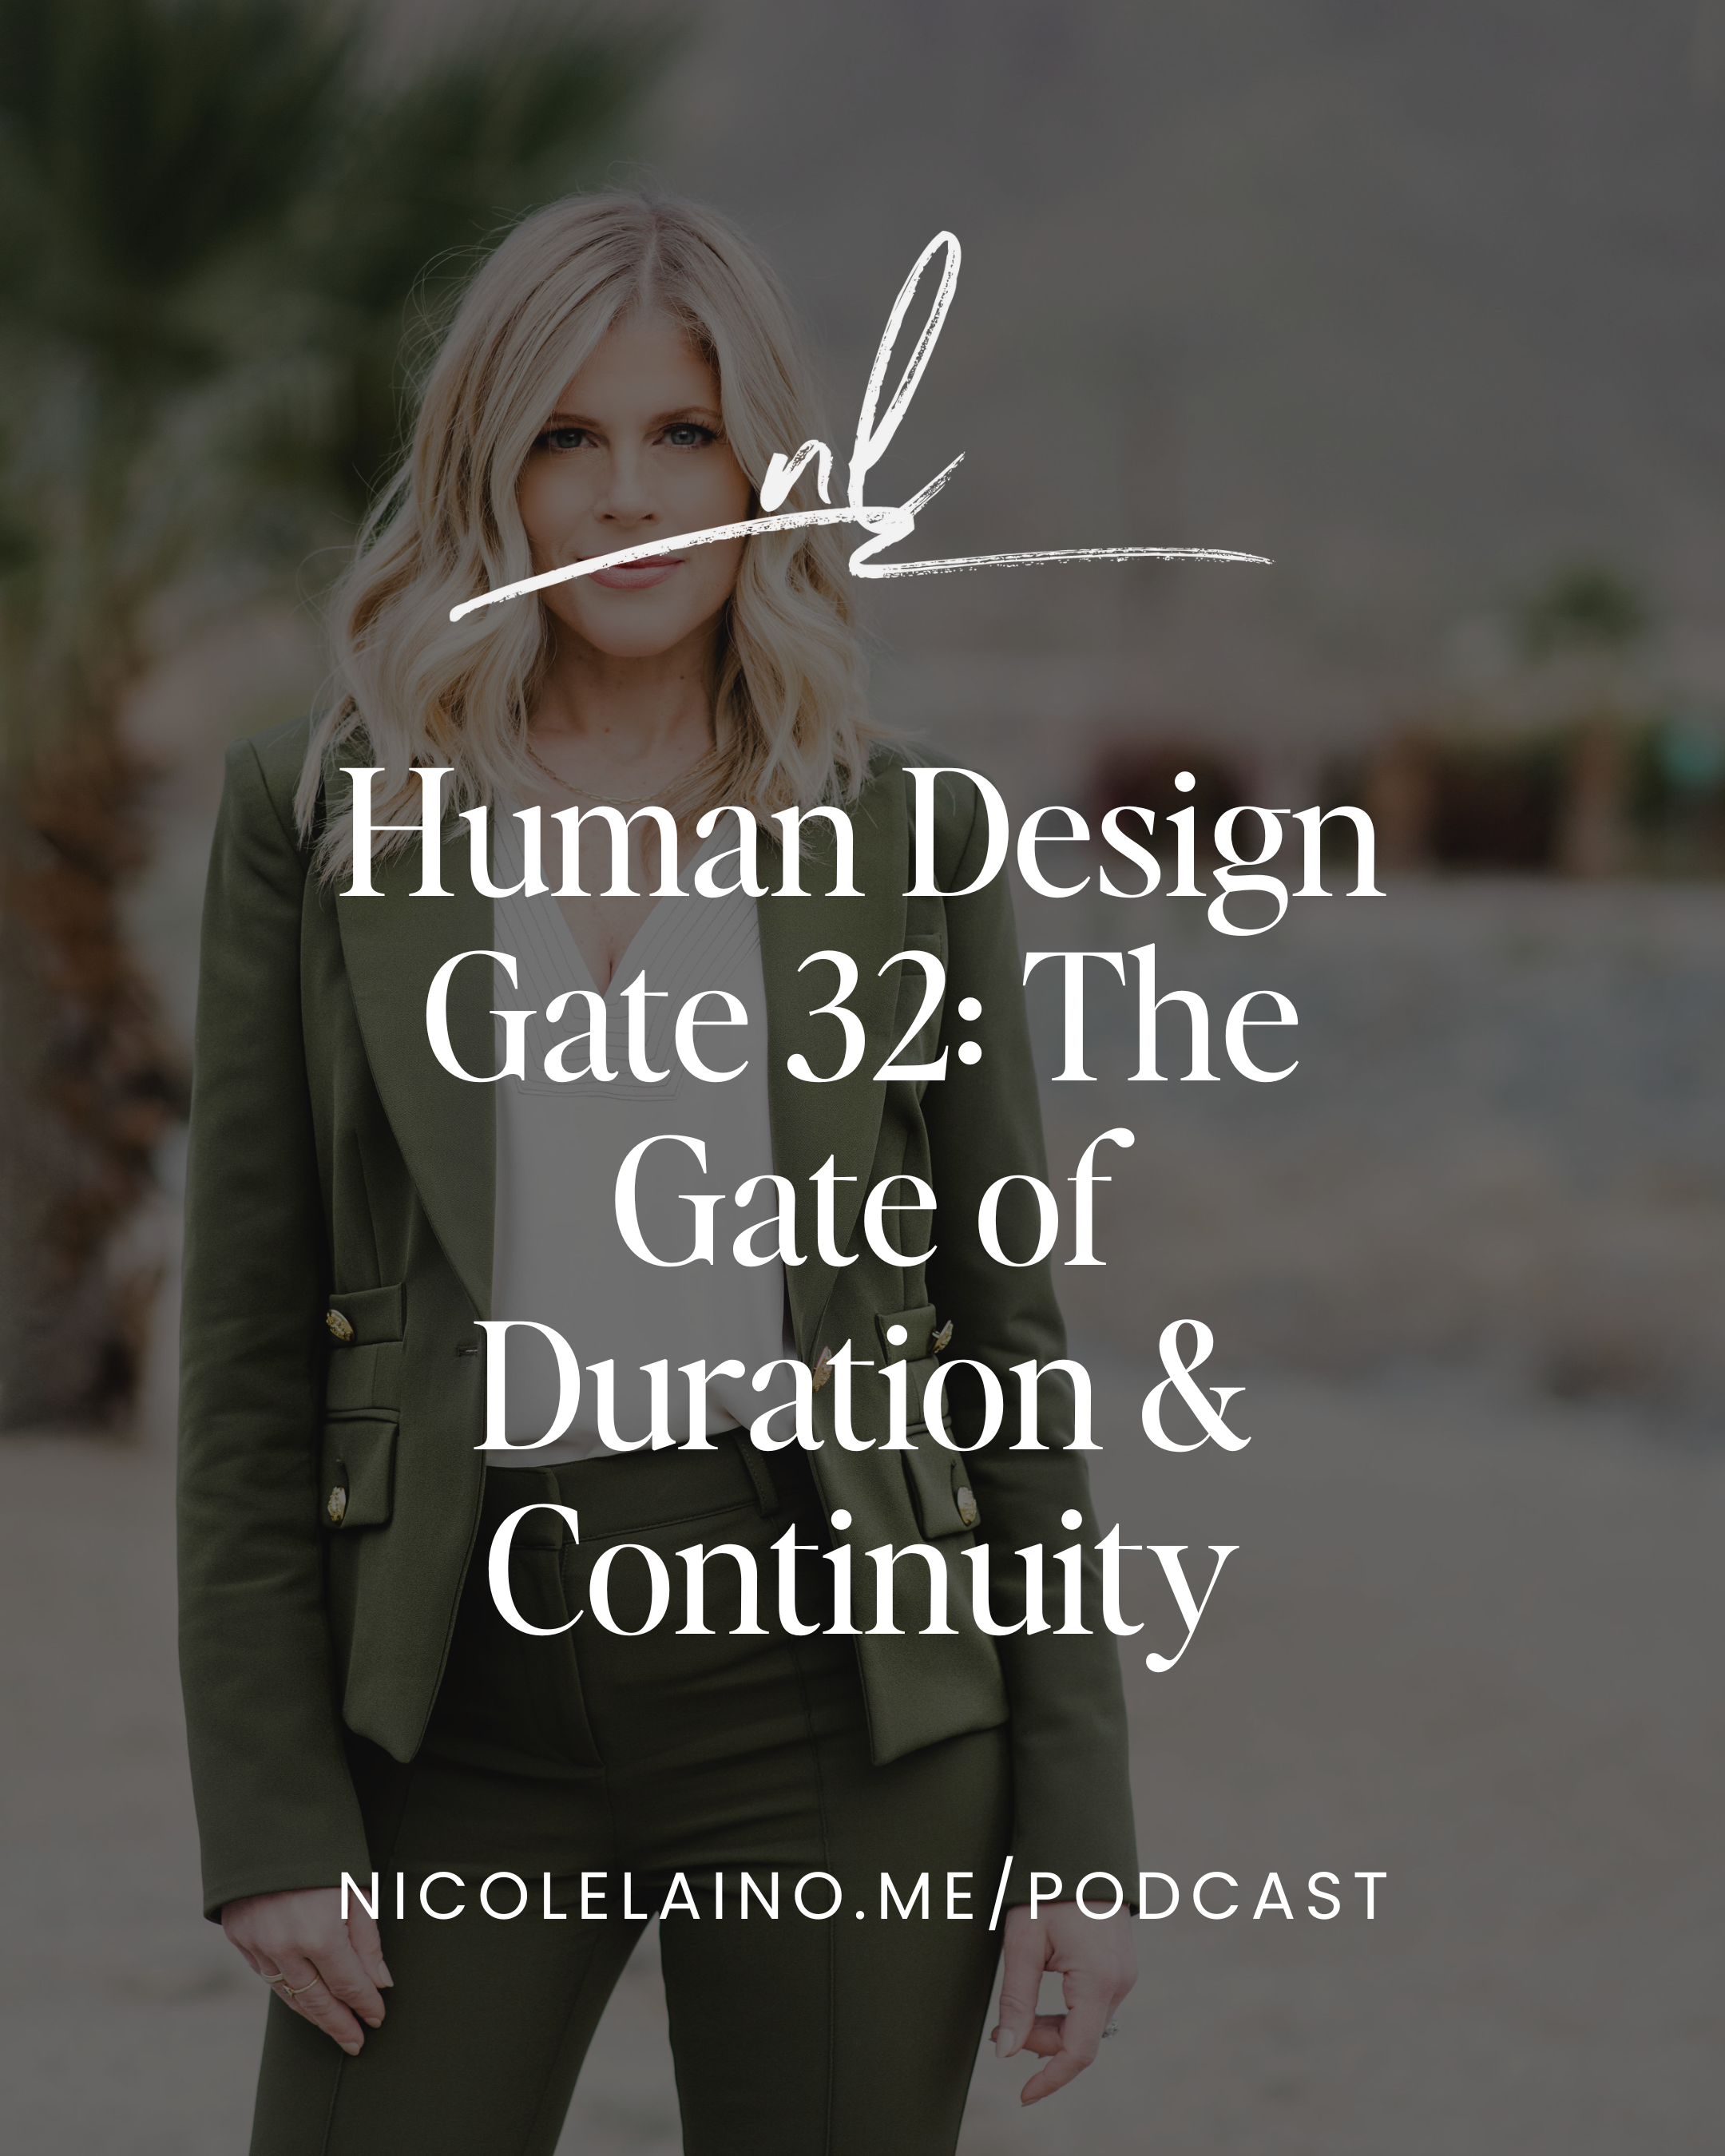 Human Design Gate 32: The Gate of Duration & Continuity